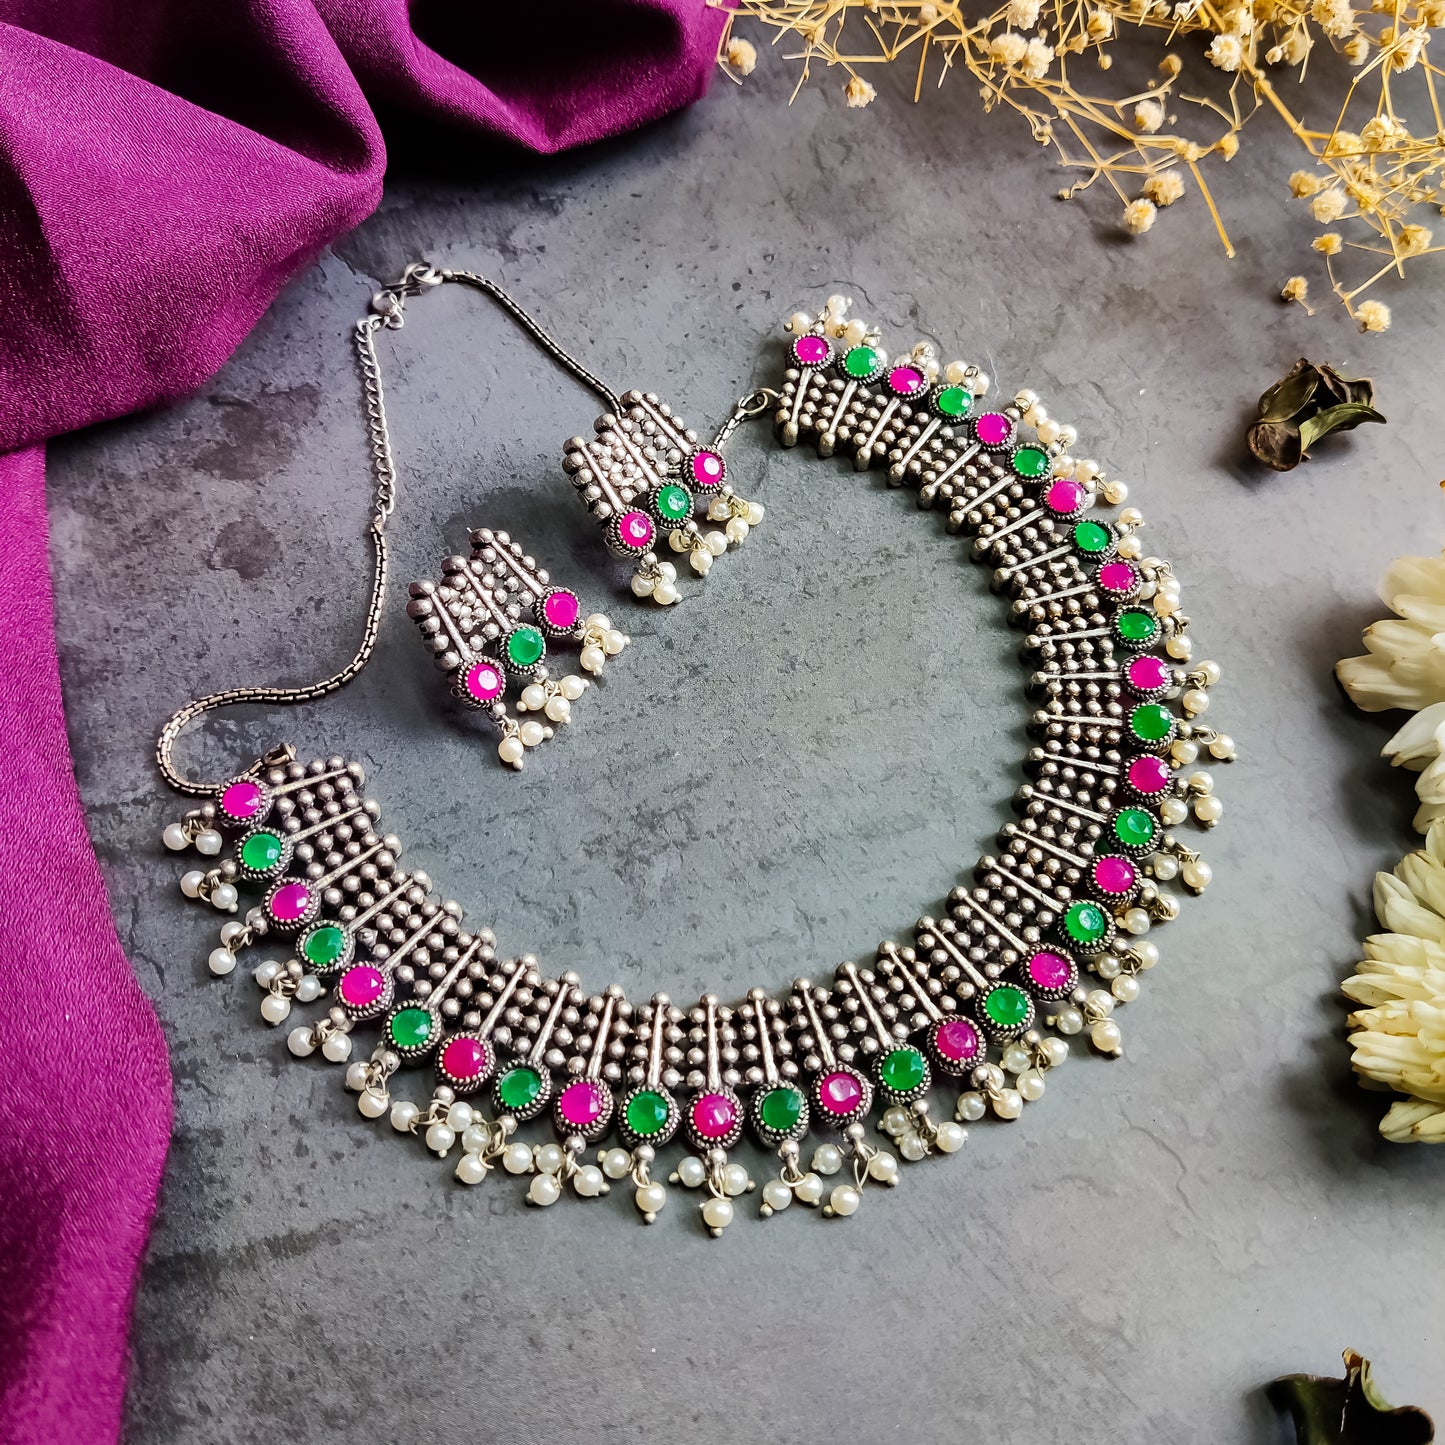 Oxidised Pearl Drop Choker Necklace Set with Earrings - Pink-Green